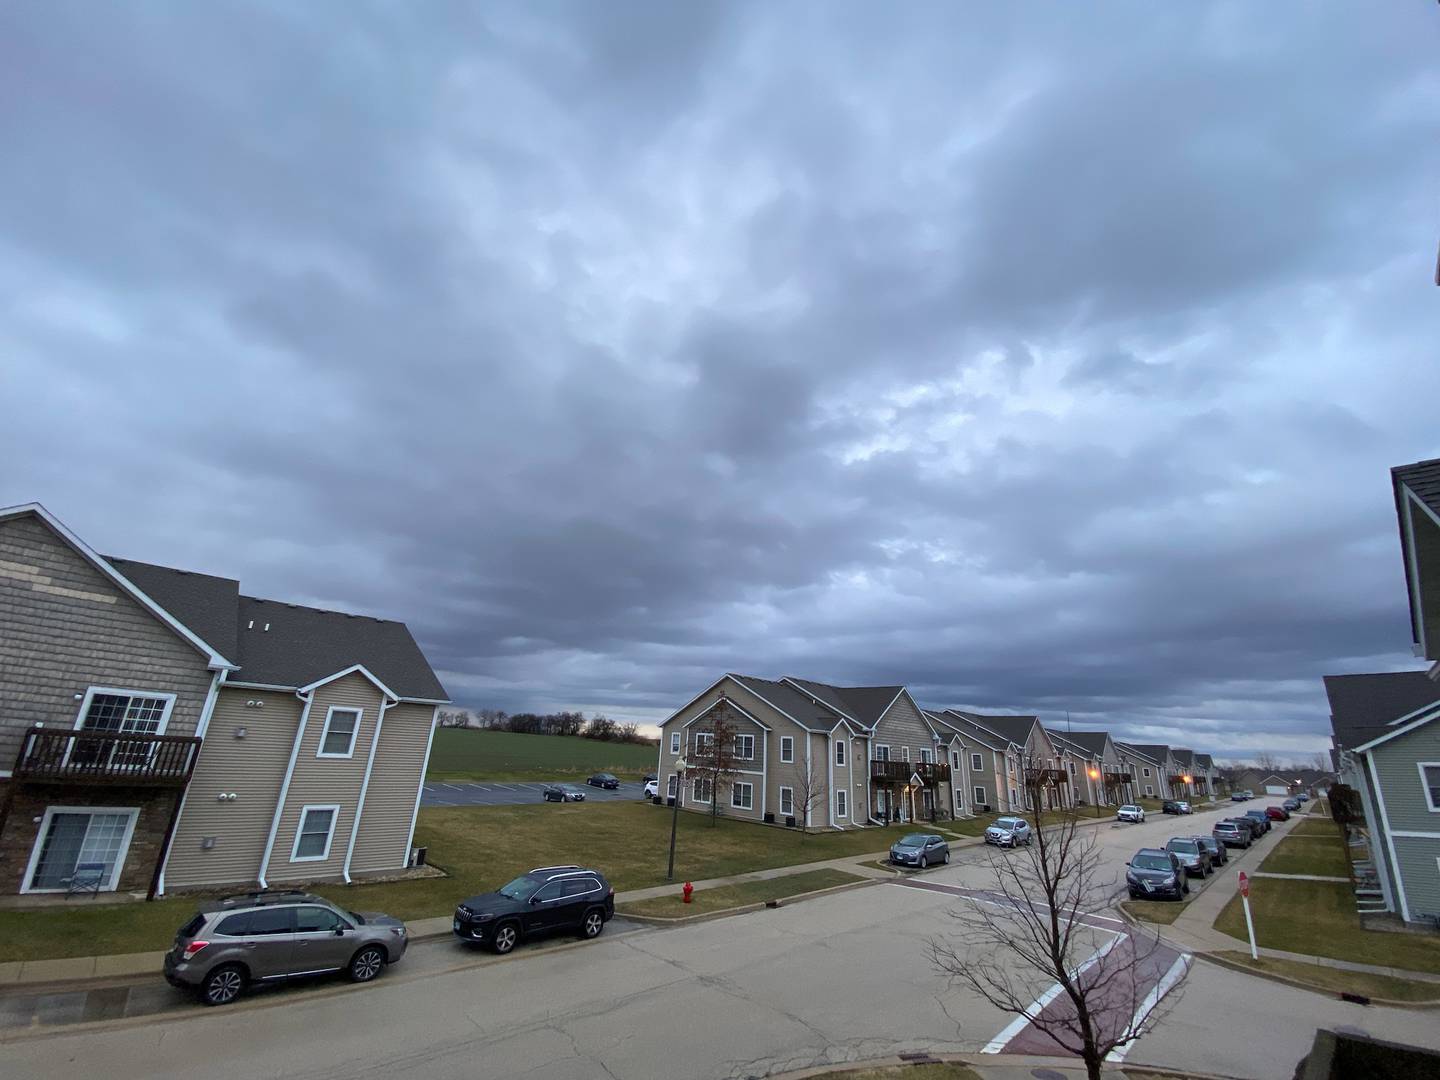 Storm clouds stacked low over Sycamore in the Stone Prairie rental community Friday, March 31, 2023.